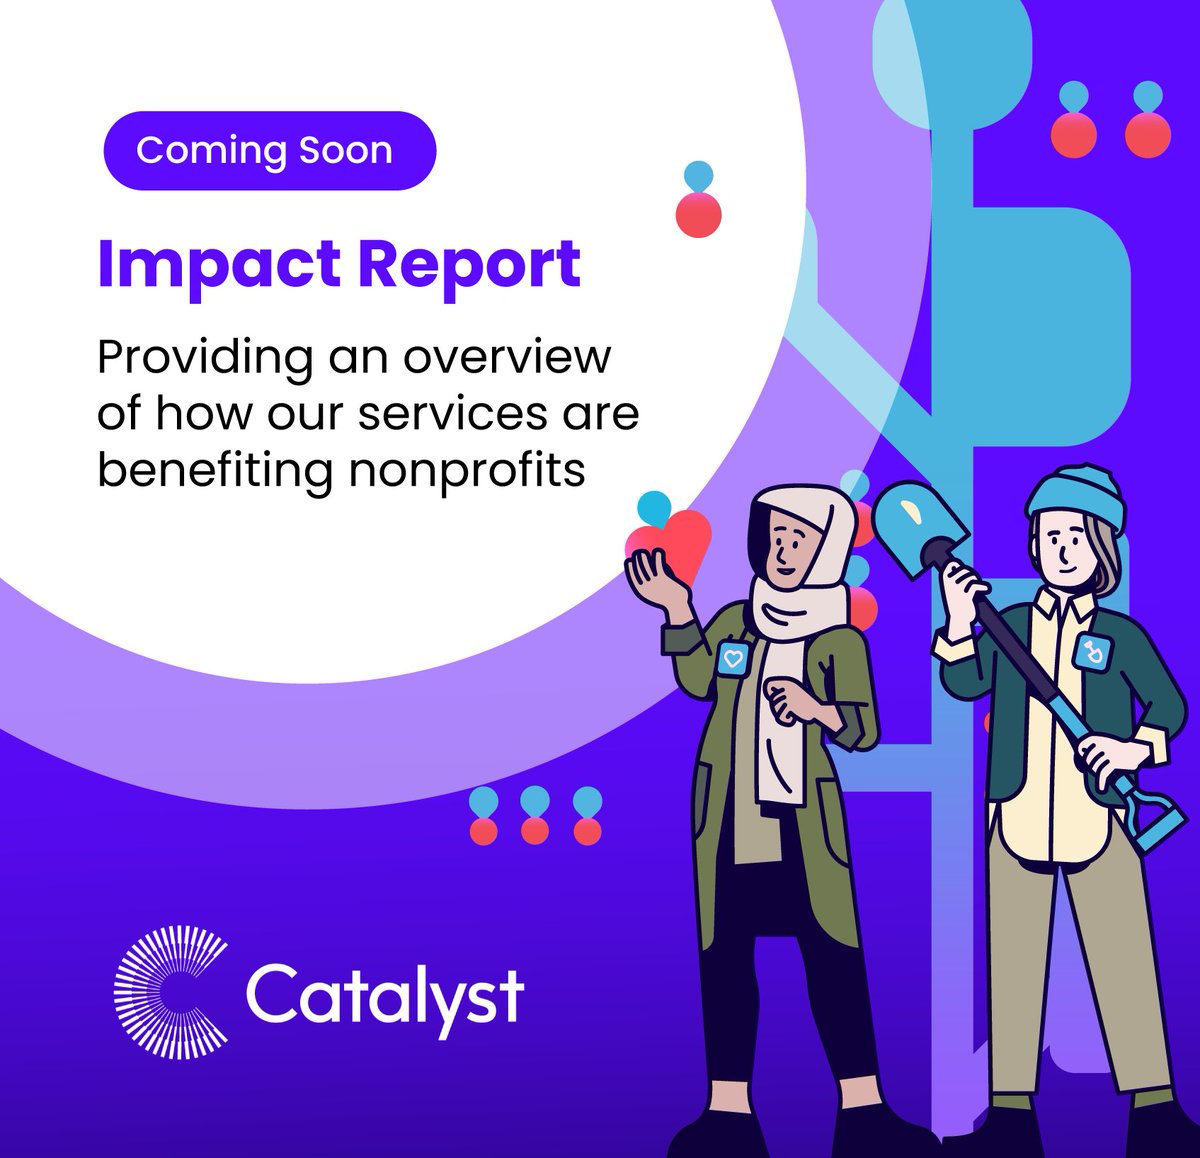 Our new impact report, compiled by leading partners @impactinfocus, will be arriving soon. It draws on 10 case studies to provide you with an overview of how Catalyst services are supporting nonprofits, digital partners and funders. #SocialImpact #DigitalServices #Nonprofits